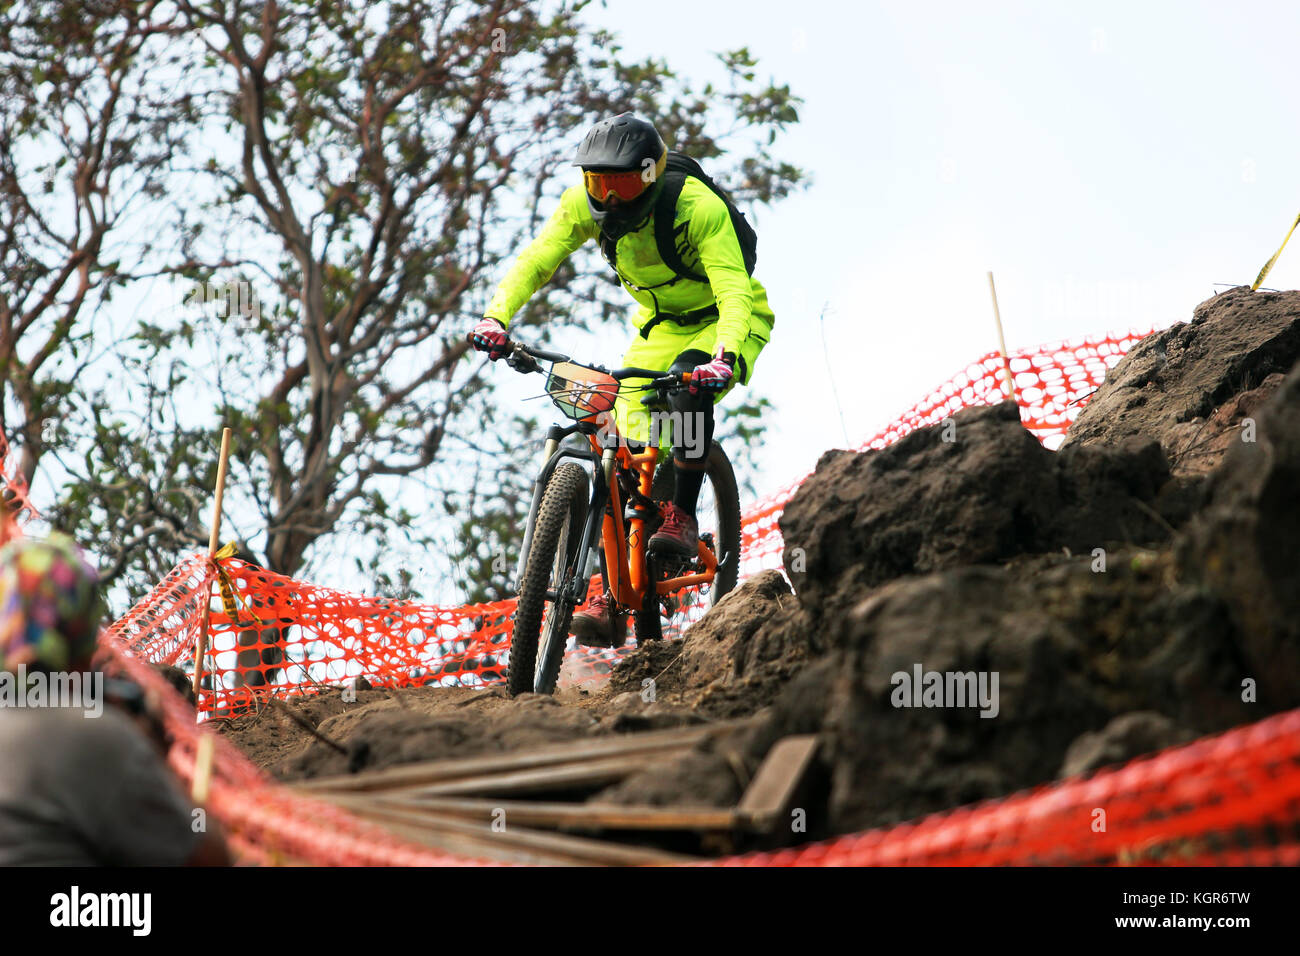 Enduro mountain biker with bright yellow costume going down hill on a rock garden Stock Photo